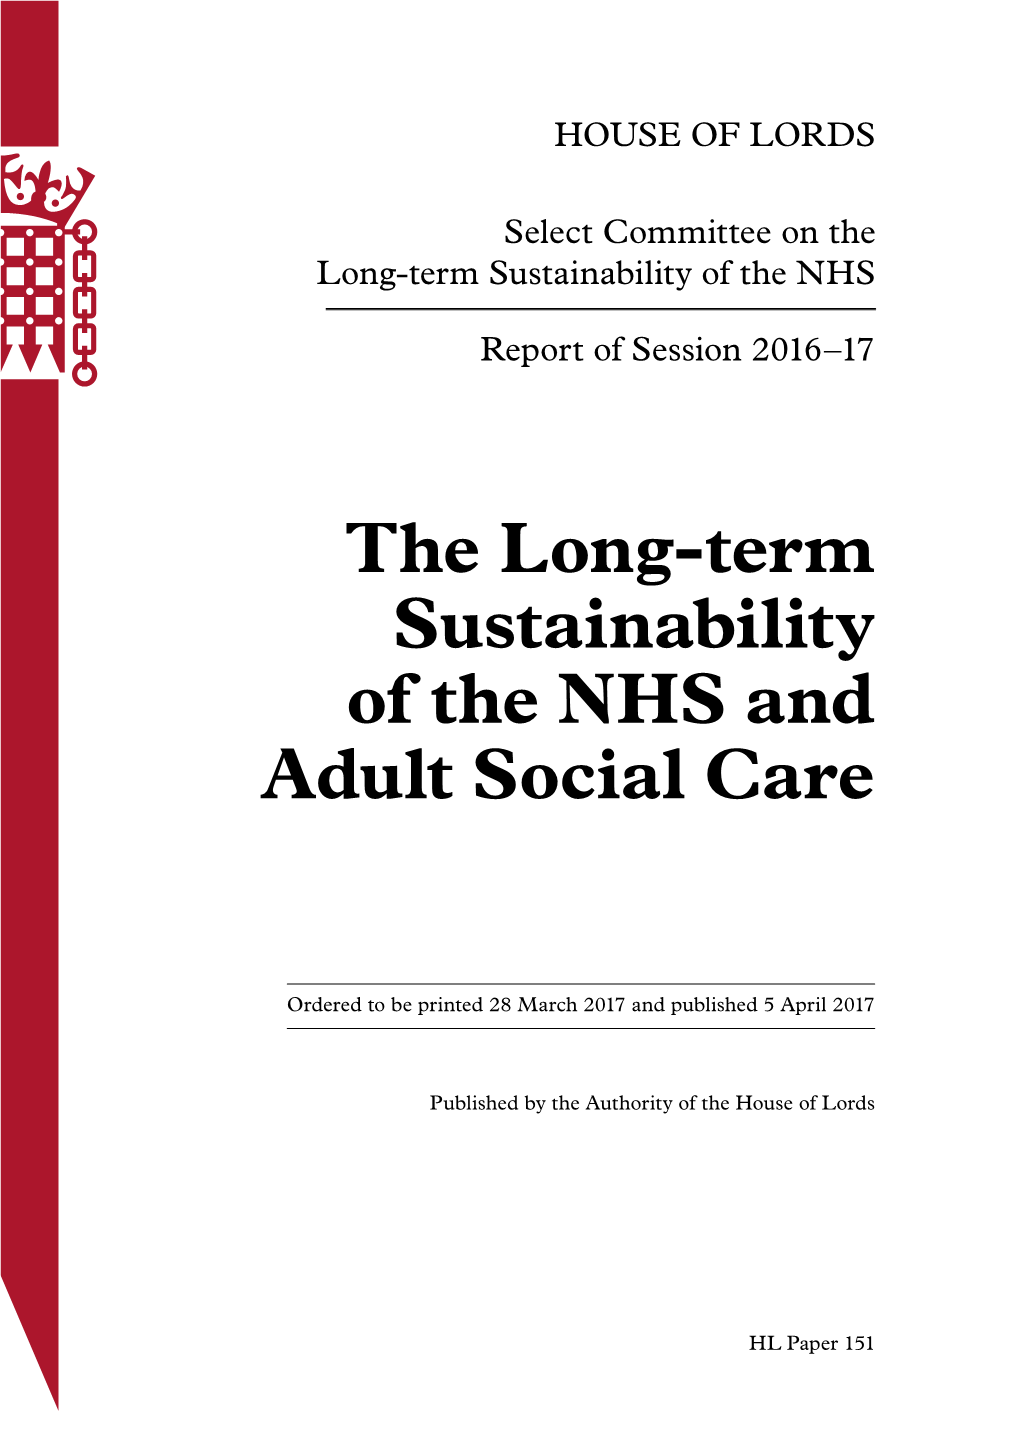 The Long-Term Sustainability of the NHS and Adult Social Care